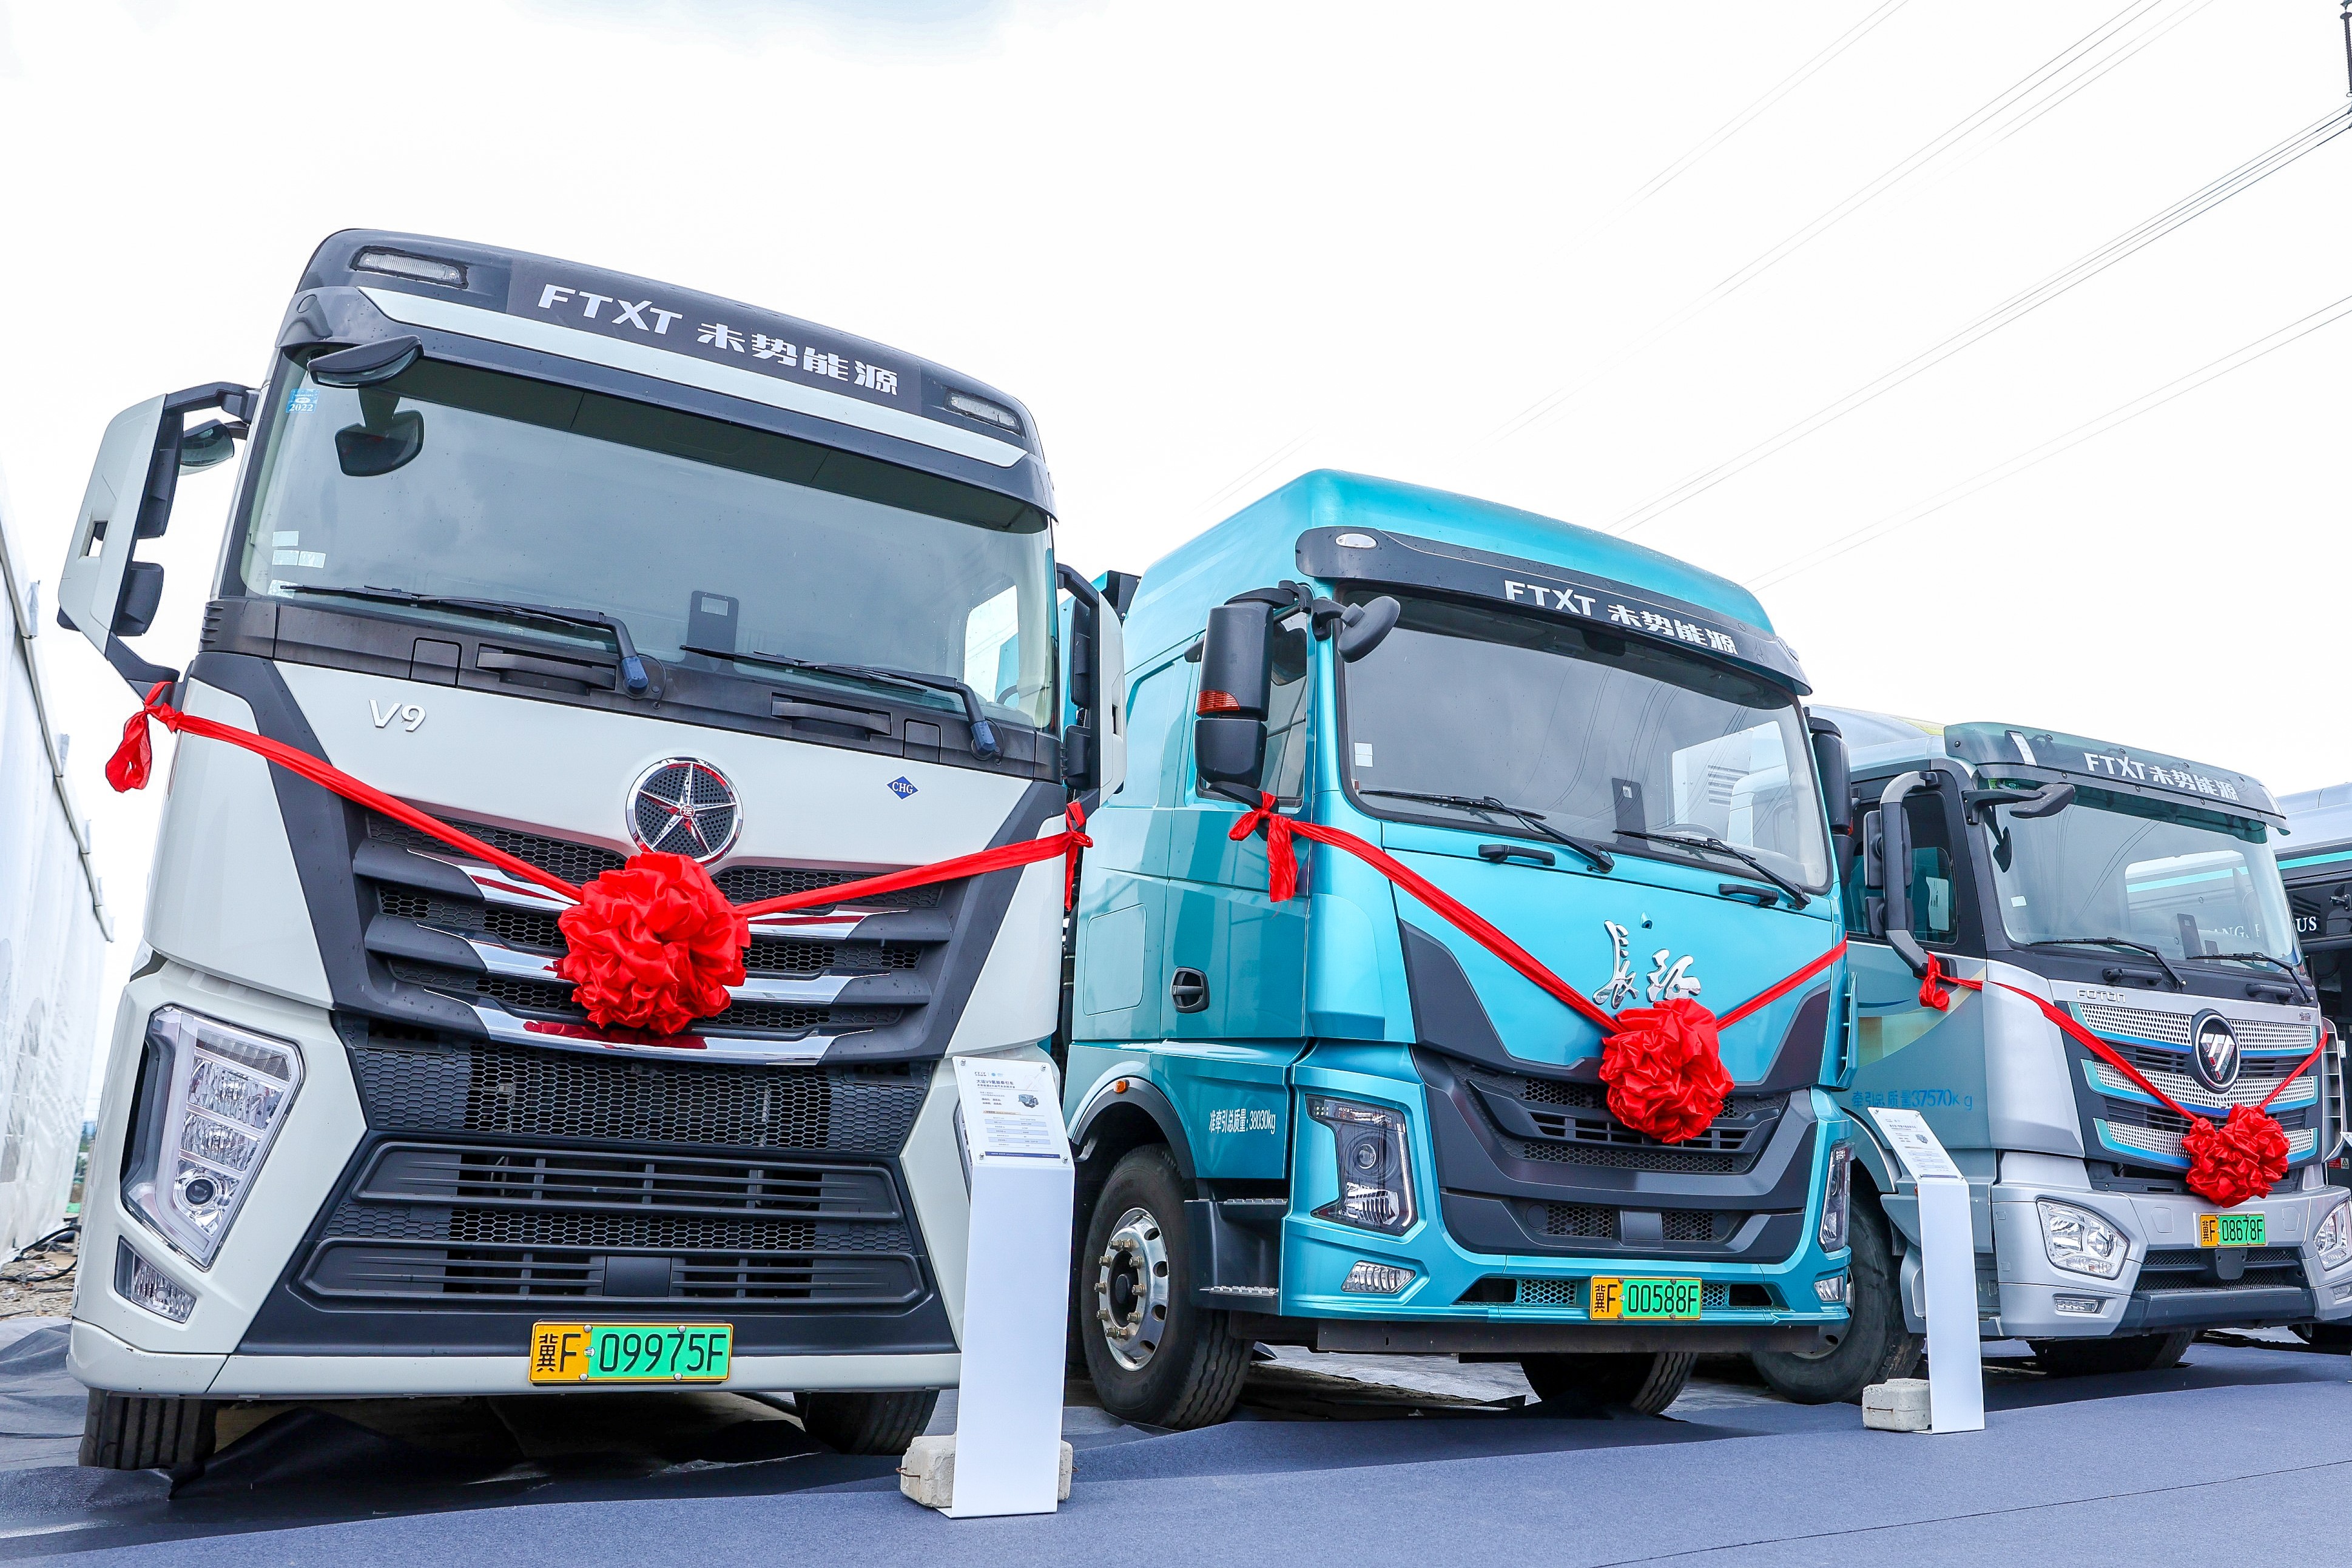 Another Batch of Hydrogen-powered Heavy-duty Trucks Has Been Deployed!GWM-FTXT is Contributing to the Development of Changshu Industrial Park in China.